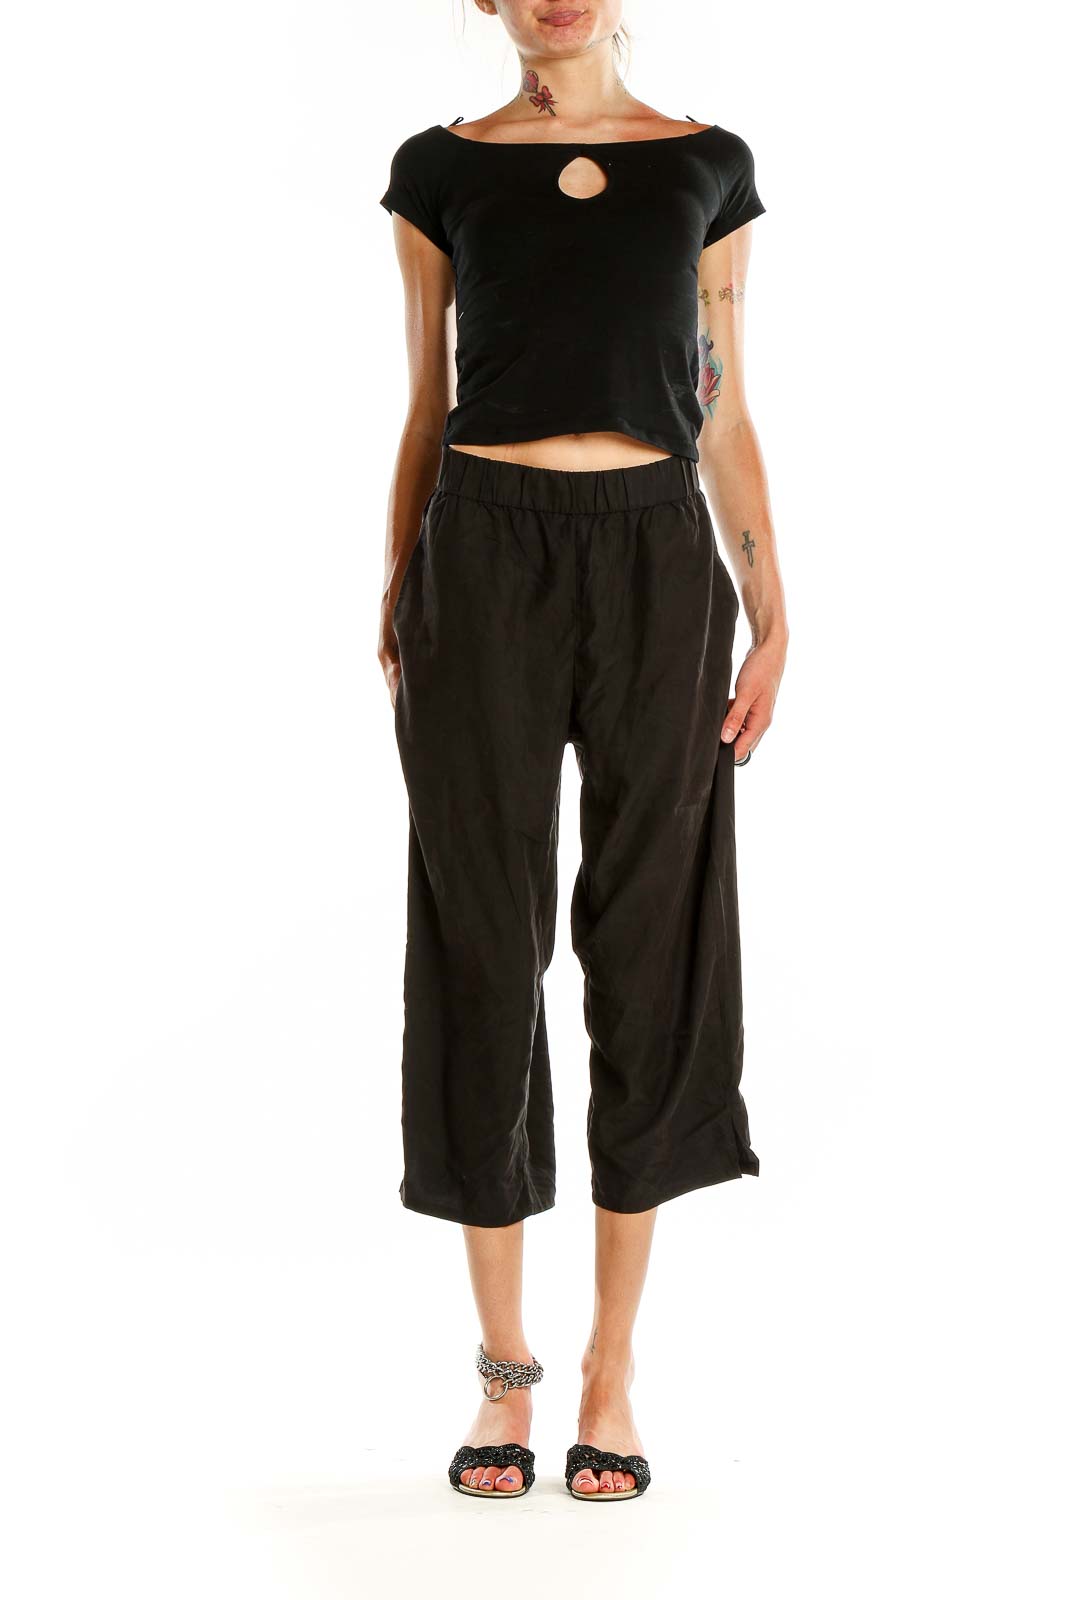 Eileen Fisher - Black Casual Pants Recycled Polyester Tencel